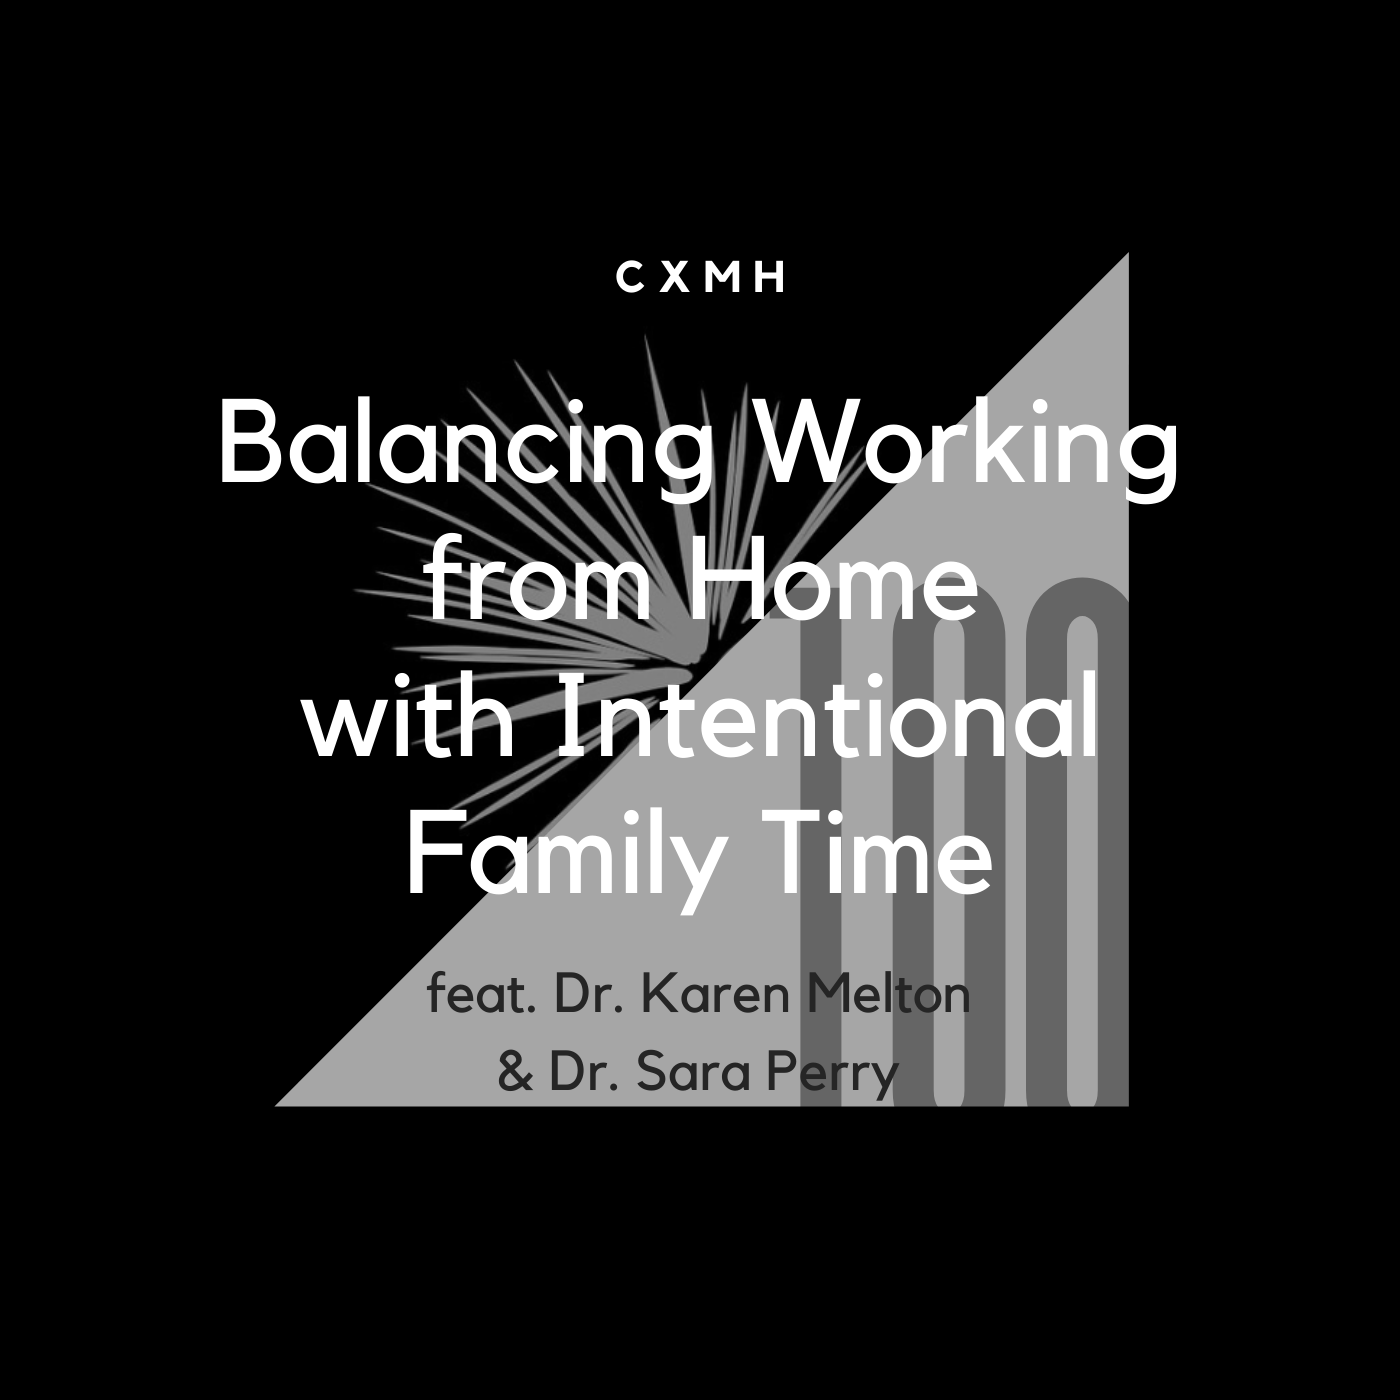 100 - Balancing Working from Home with Intentional Family Time (feat. Dr. Karen Melton & Dr. Sara Perry)